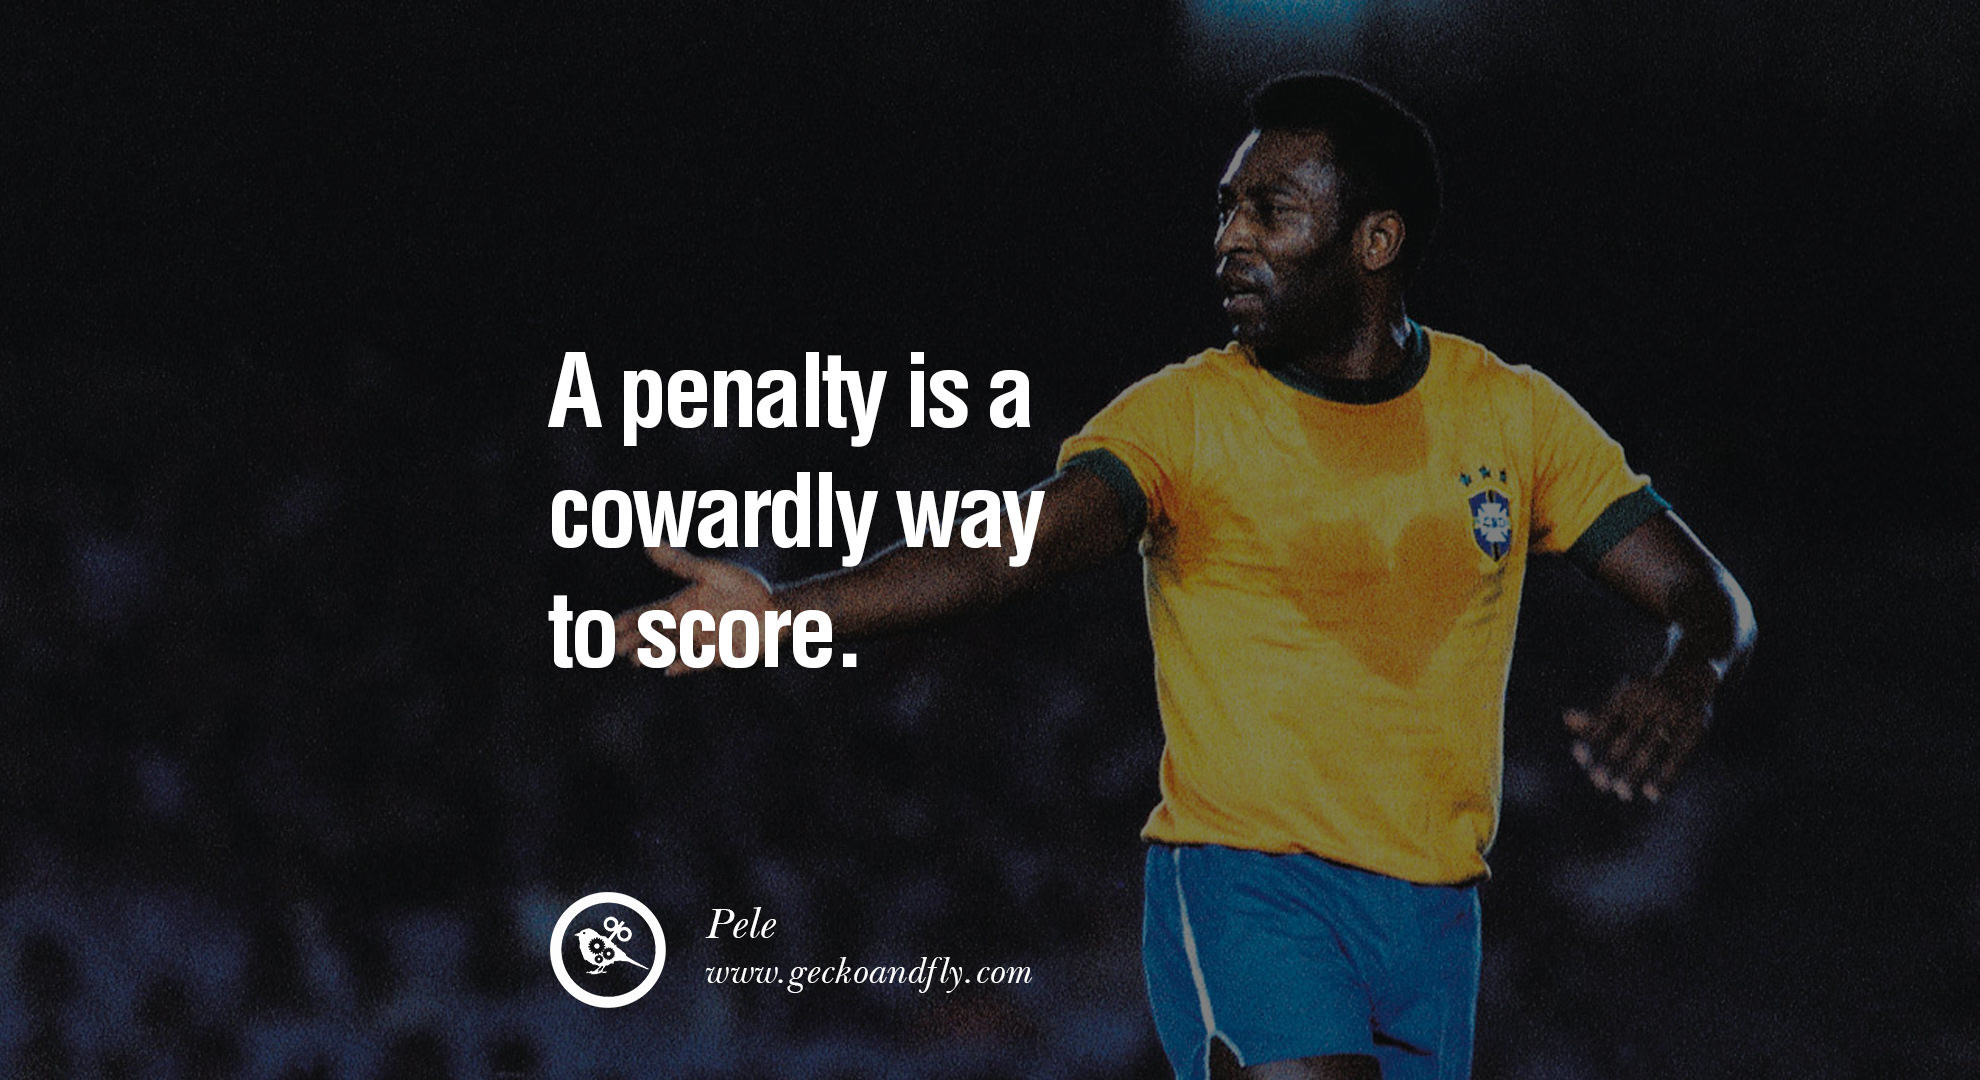 1980x1080 football fifa brazil world cup 2014 A penalty is a cowardly way to score. -